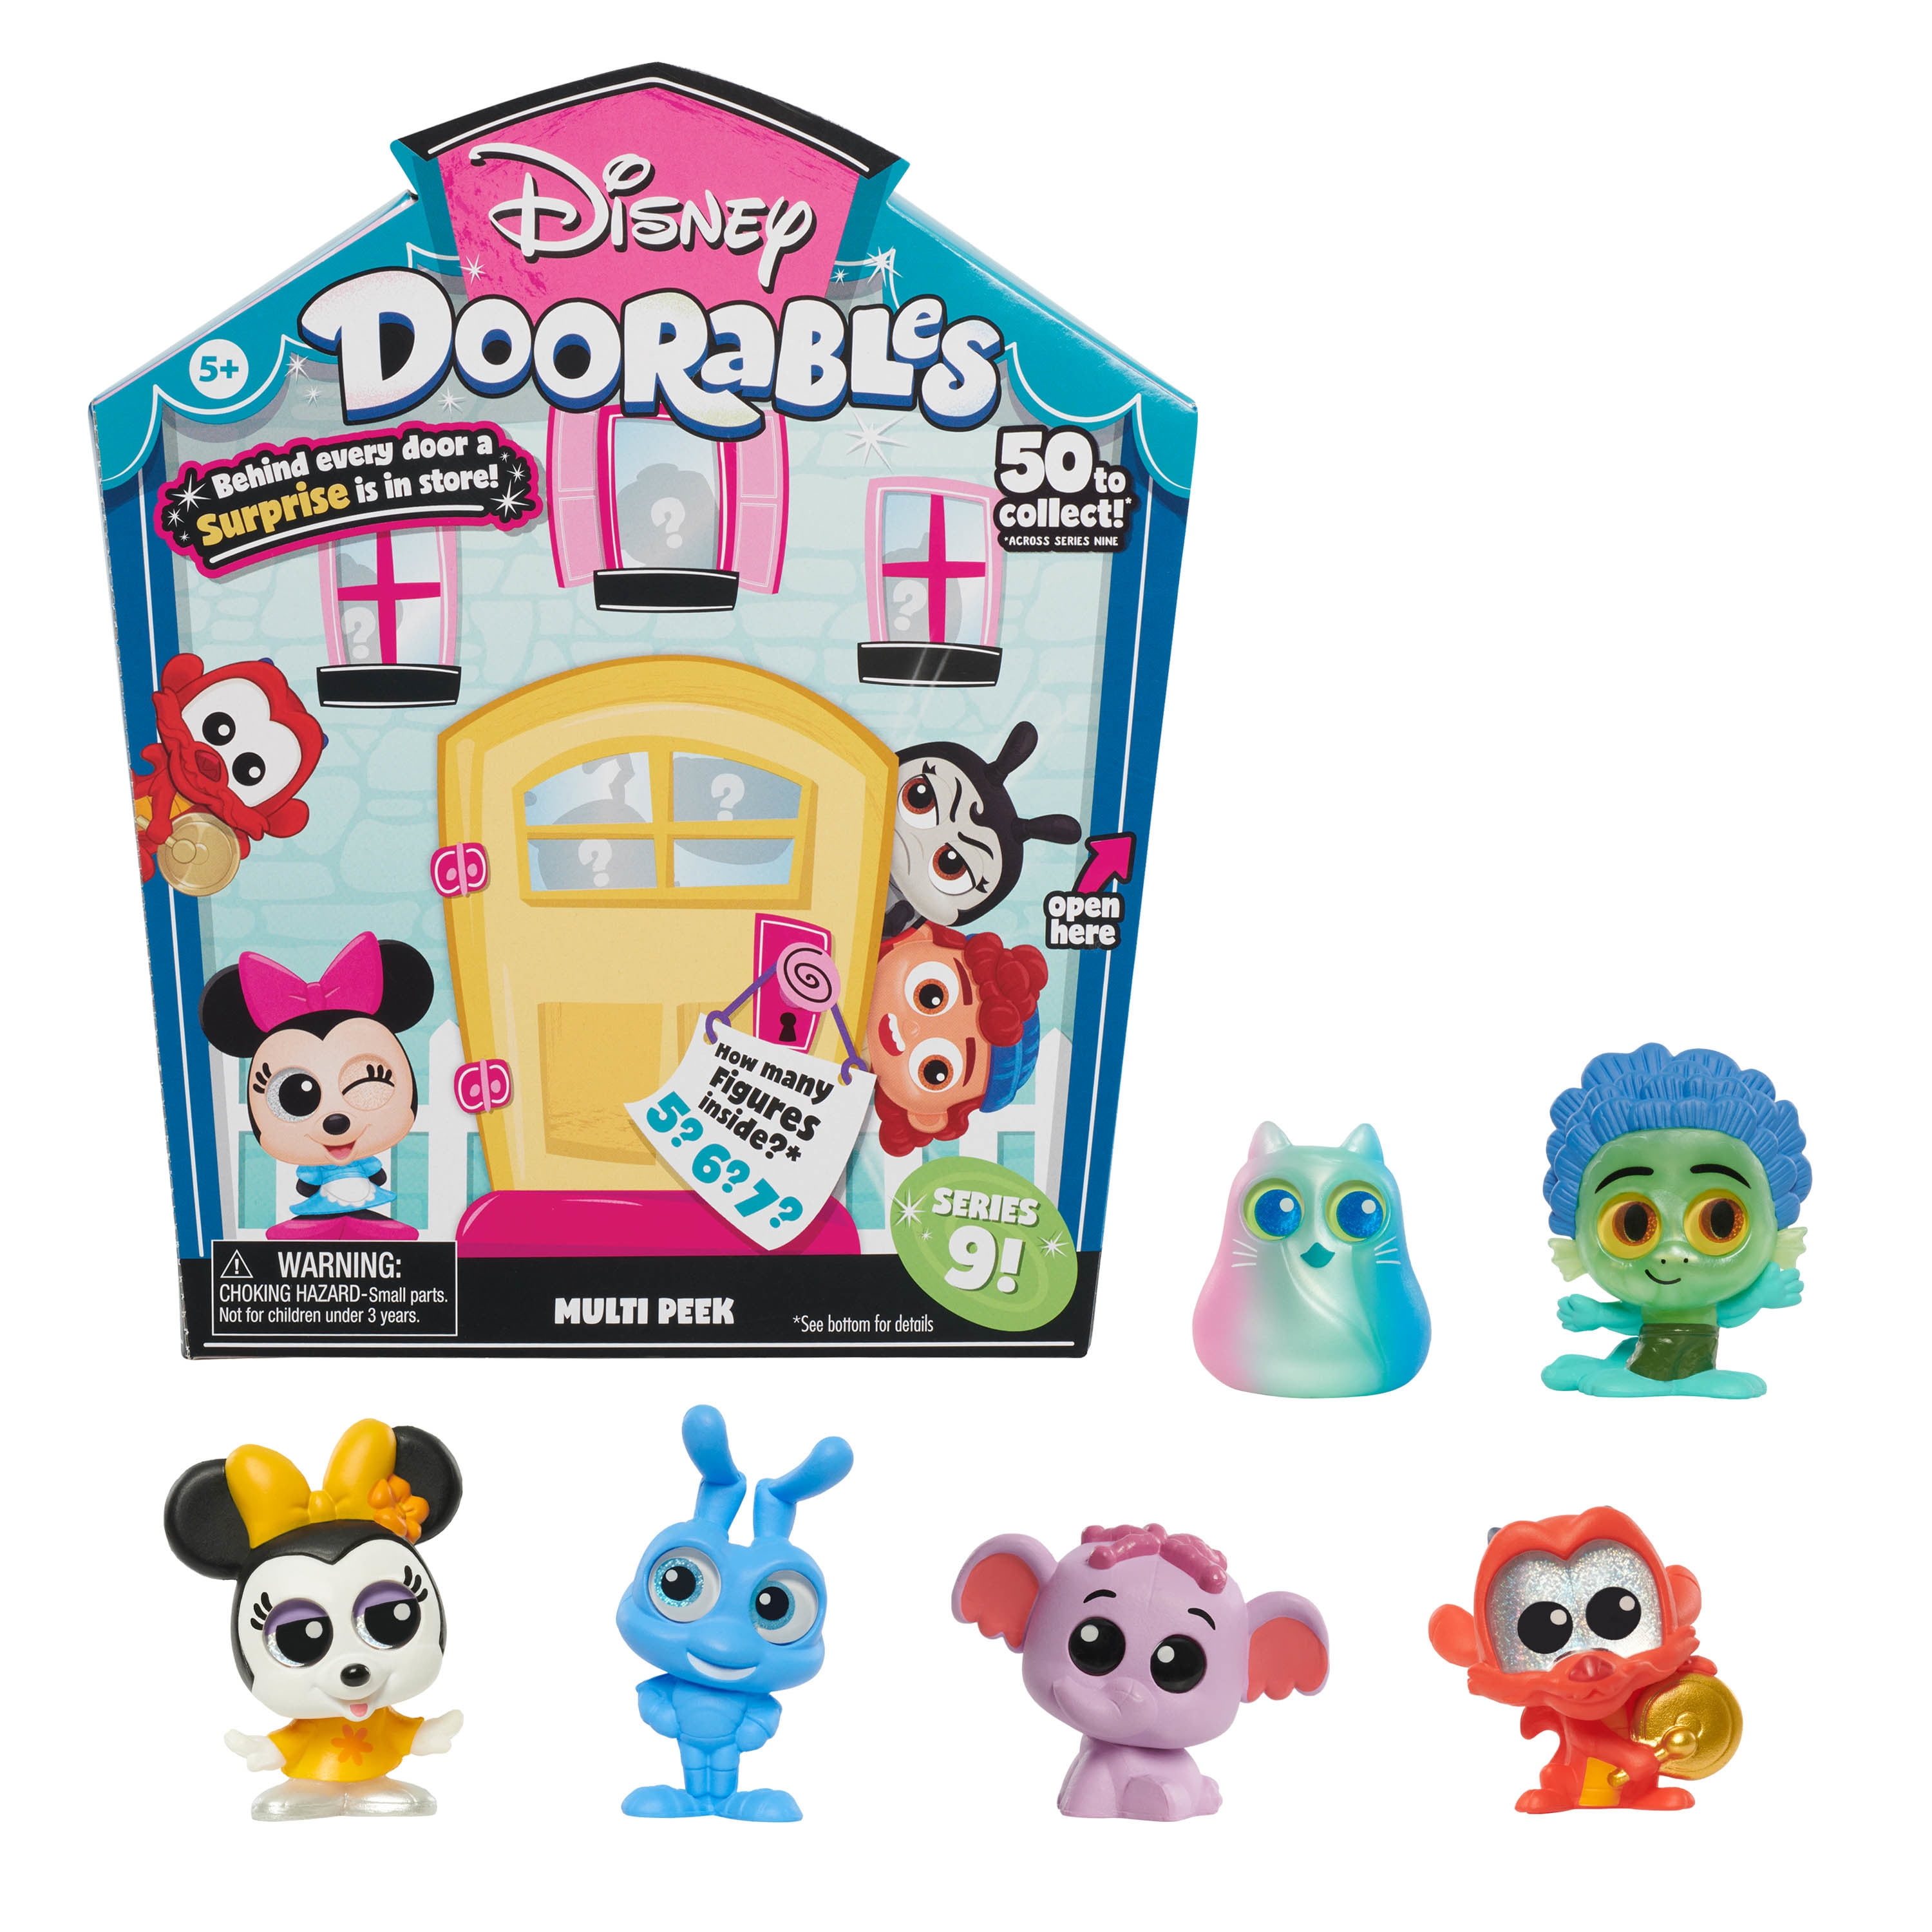 Disney Doorables Multi Peek Series 9, Collectible Blind Bag Figures, Officially Licensed Kids Toys for Ages 5 Up, Gifts and Presents